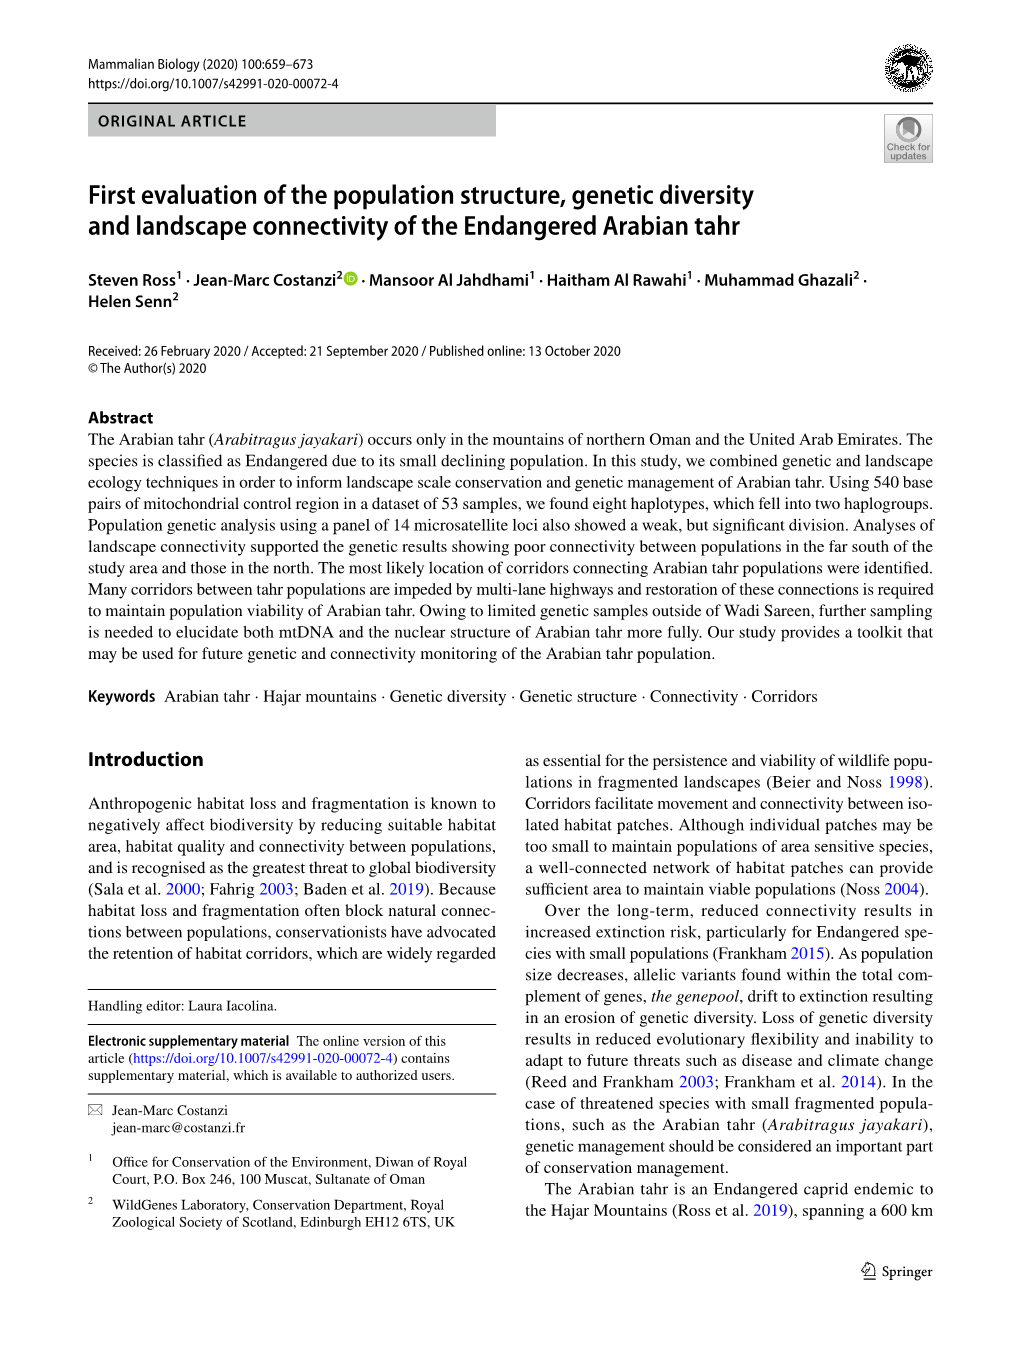 First Evaluation of the Population Structure, Genetic Diversity and Landscape Connectivity of the Endangered Arabian Tahr